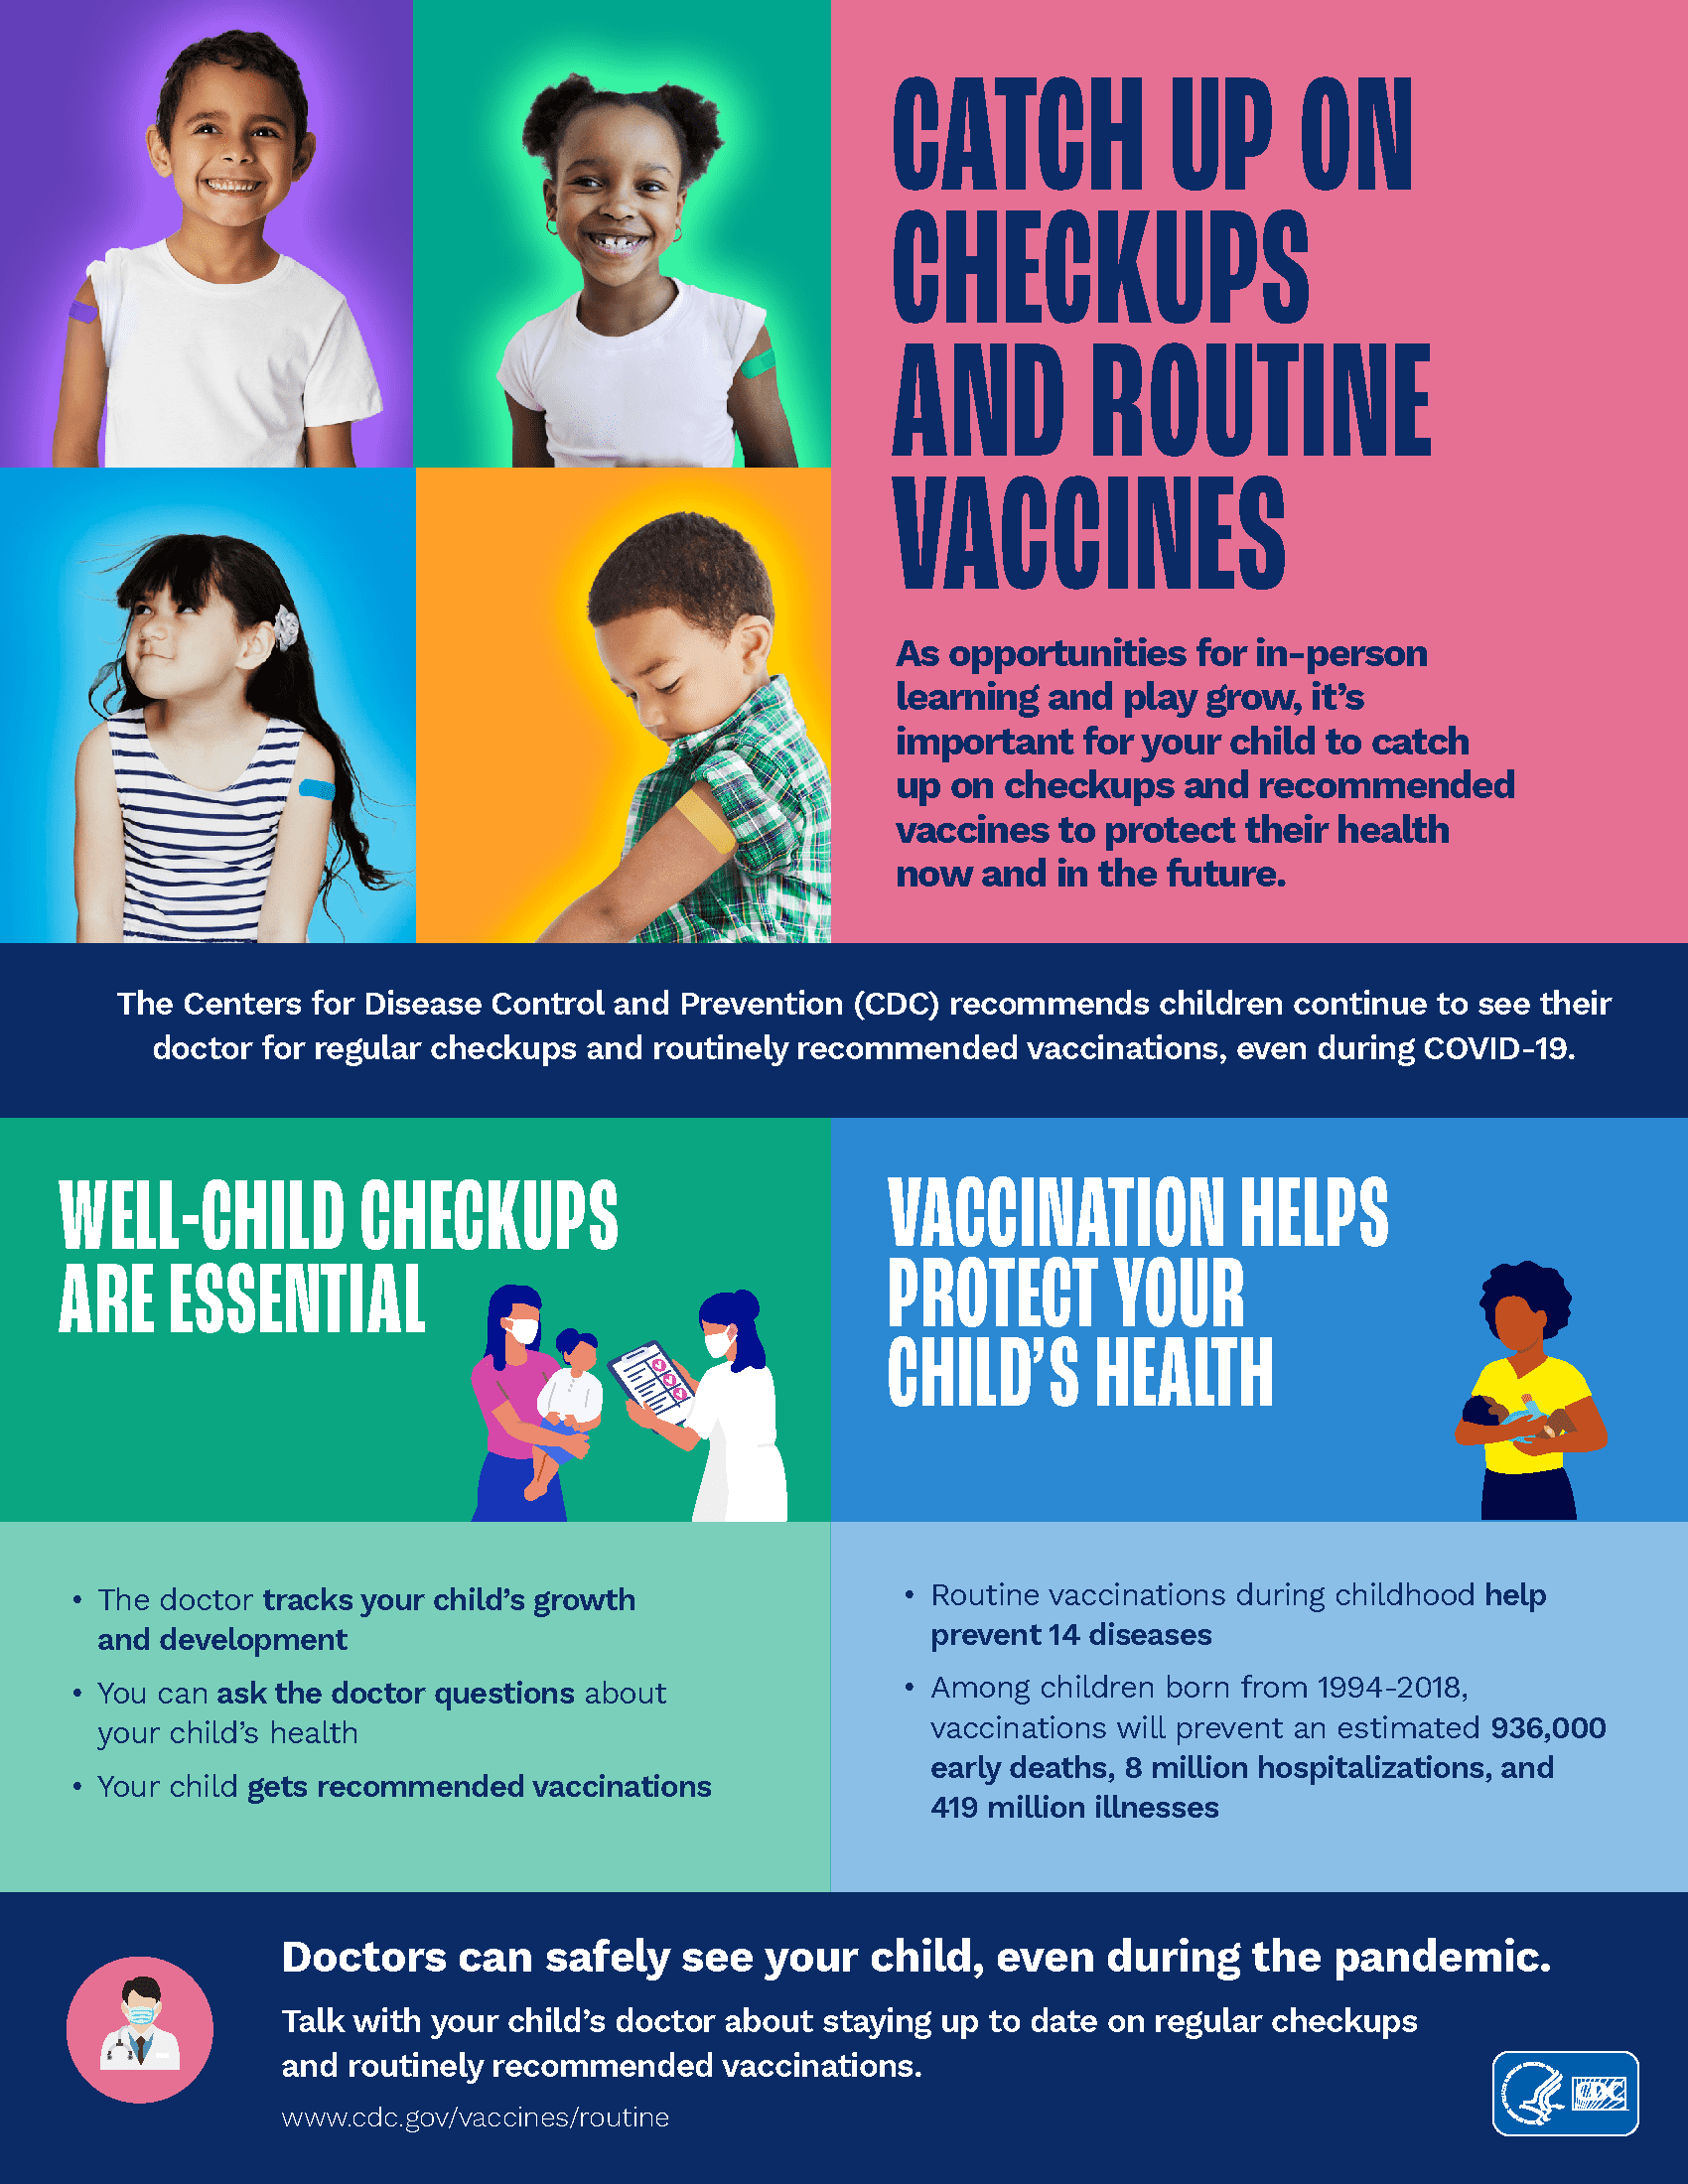 Catch up on checkups and routine vaccines